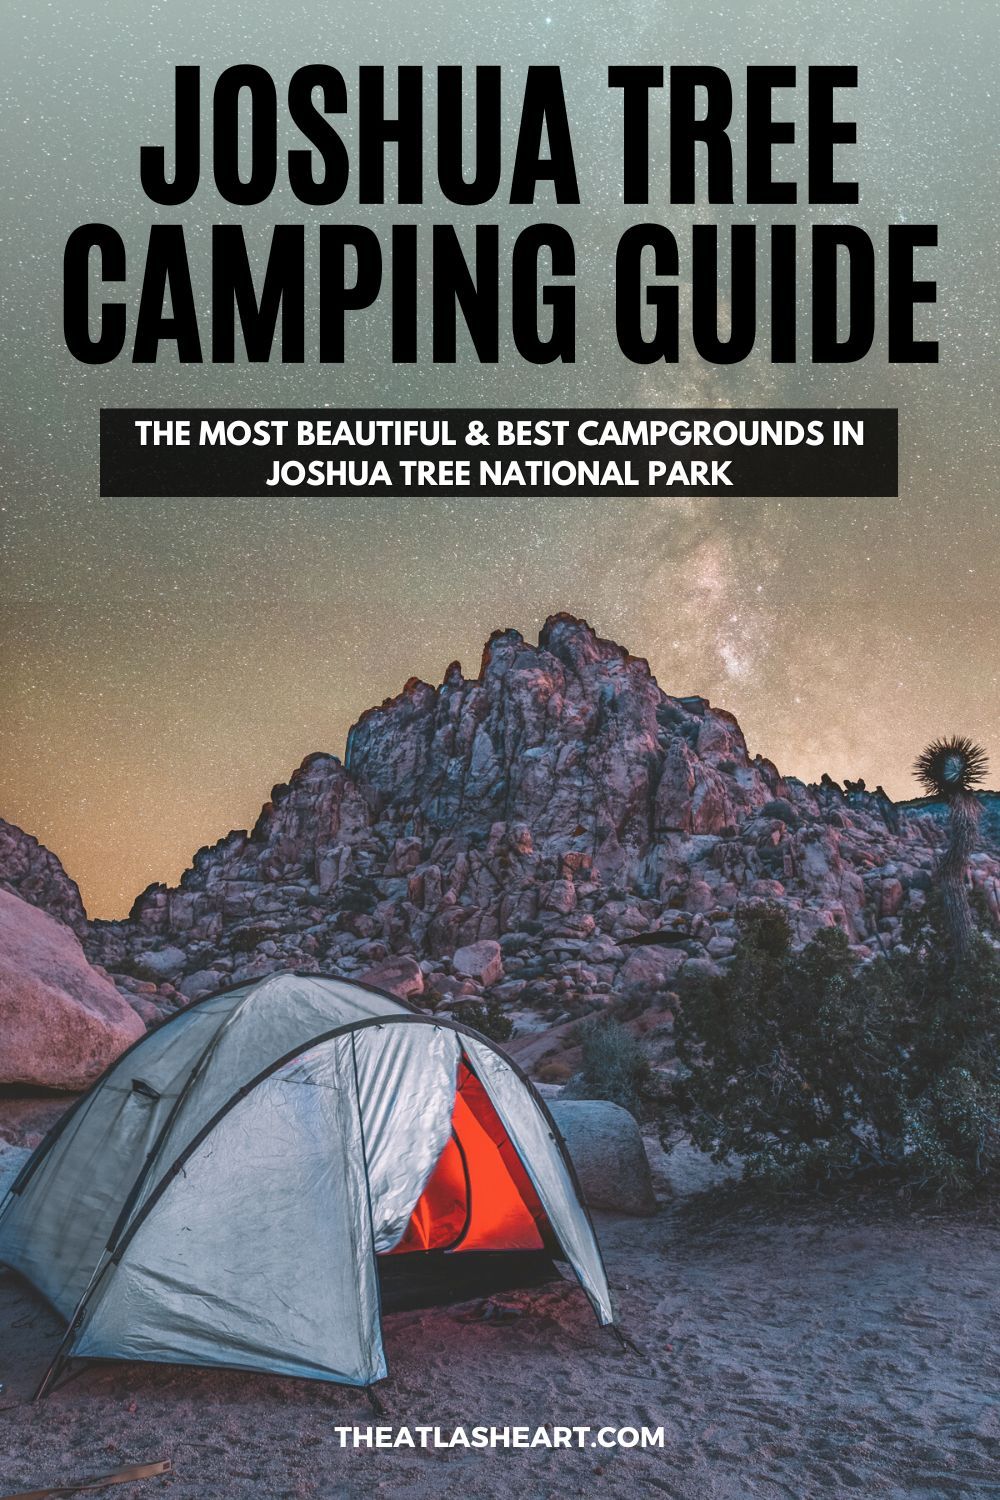 Joshua Tree Camping Guide: The Most Beautiful & Best Campgrounds in Joshua Tree National Park